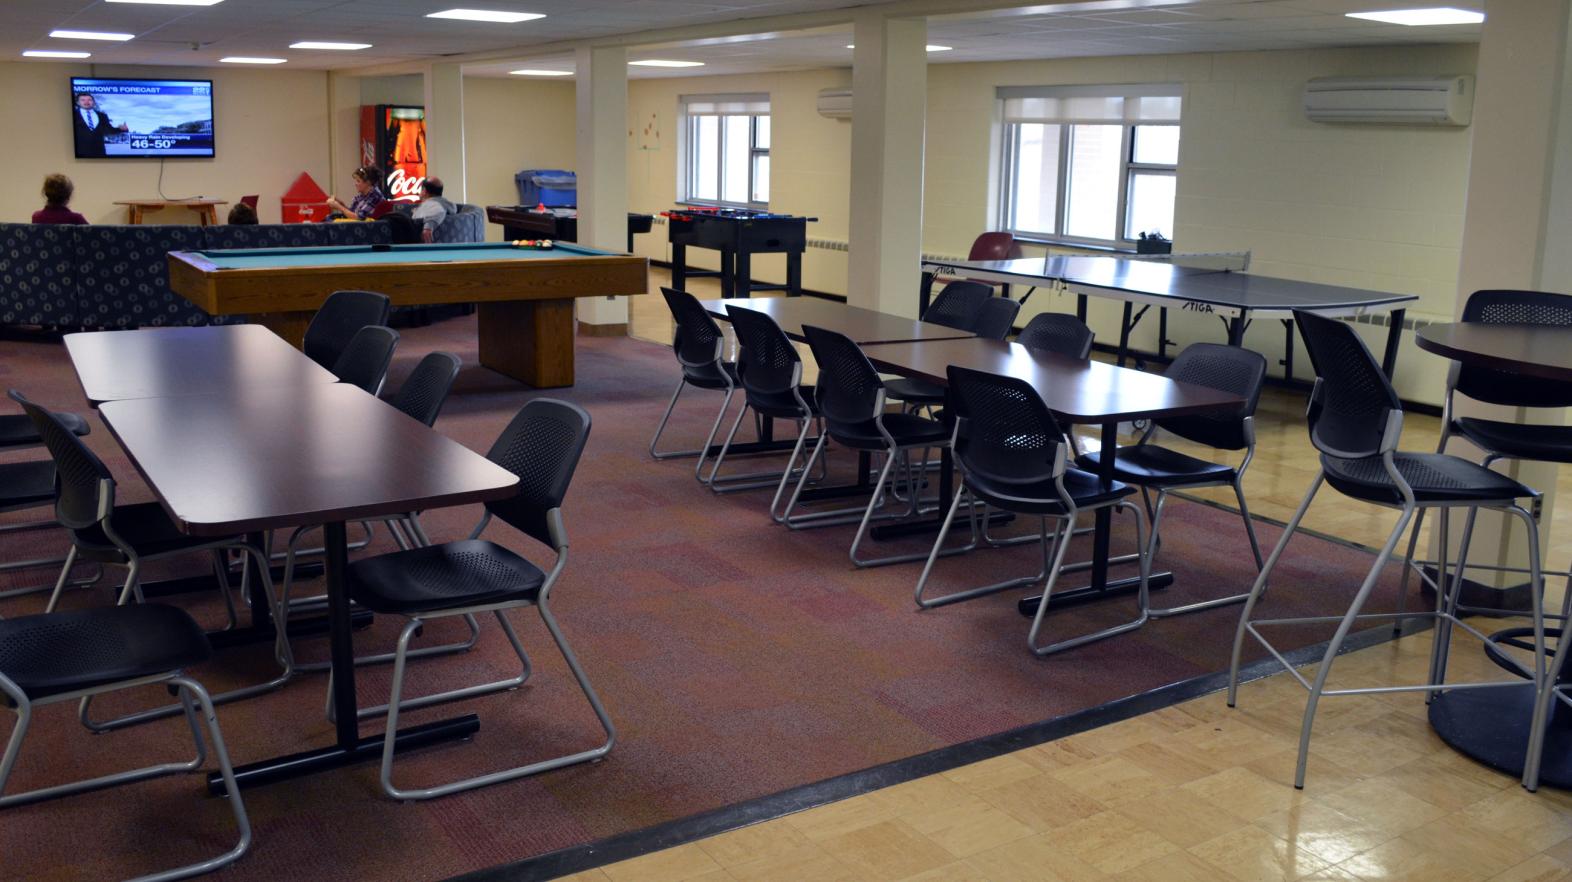 The common area in Massasoit residence hall, complete with dining area and TV area.